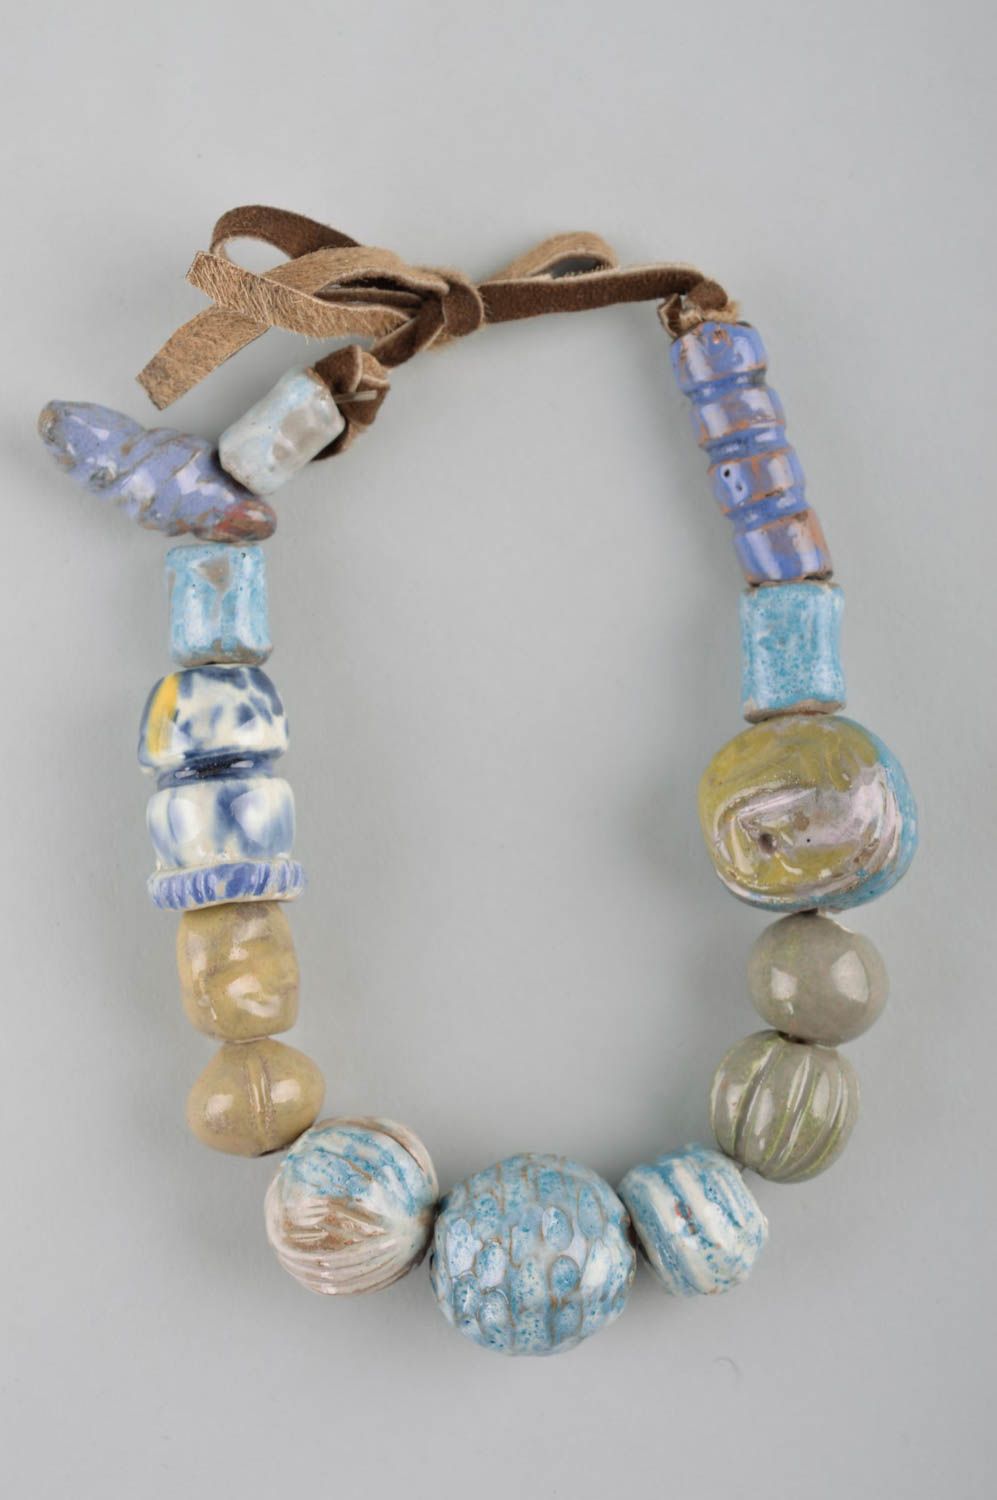 Stylish handmade ceramic necklace bead necklace design fashion tips for her photo 2